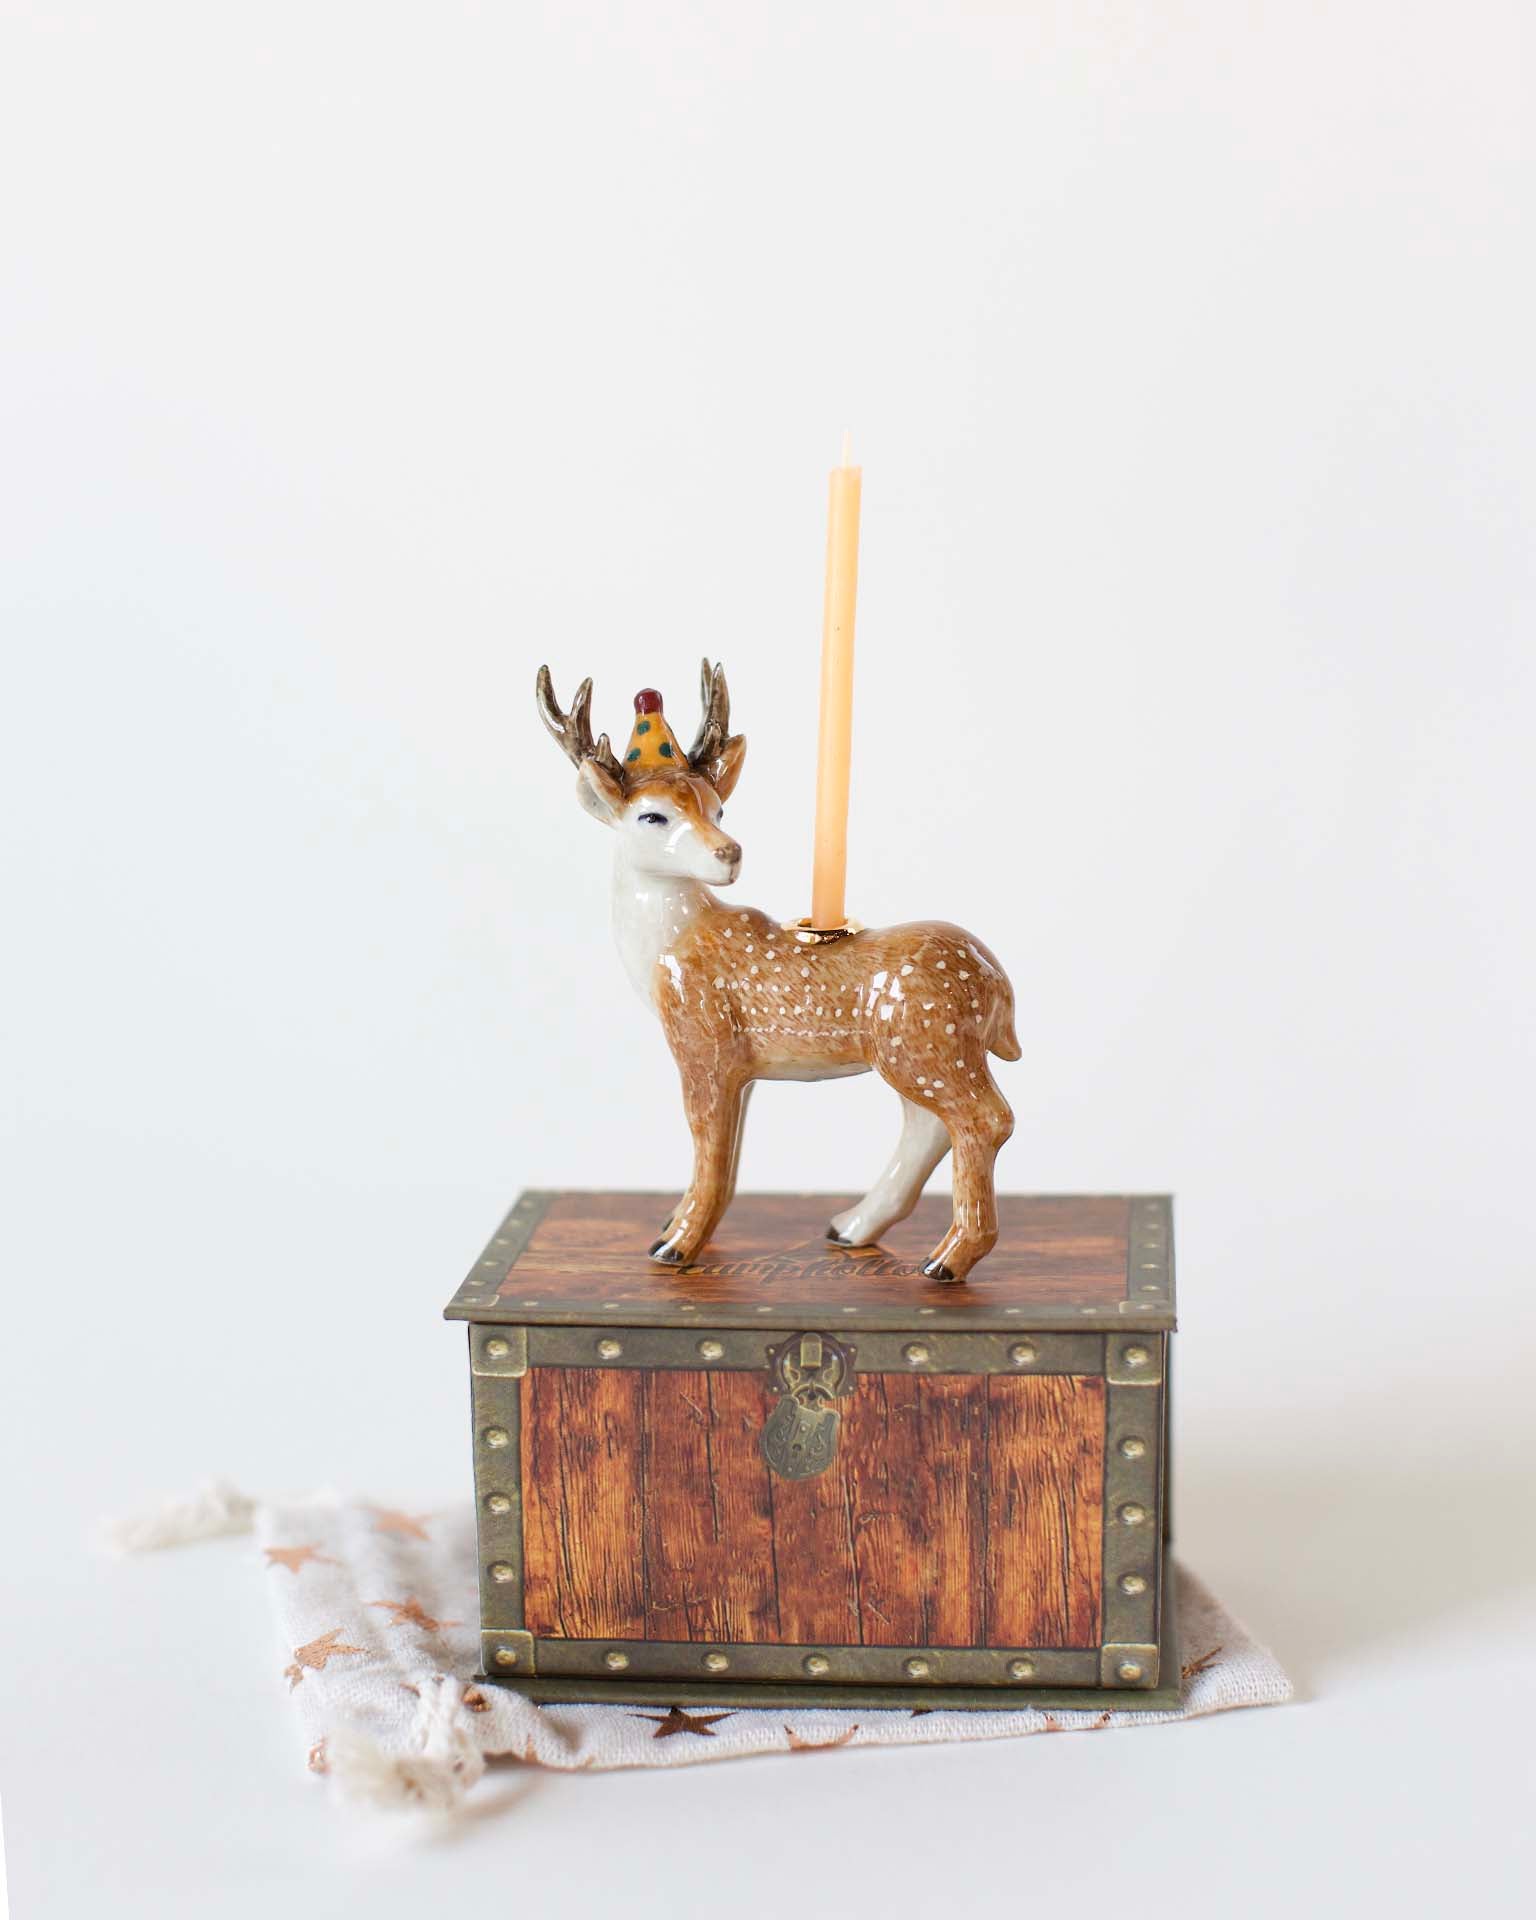 Little camp hollow paper + party stag cake topper in box